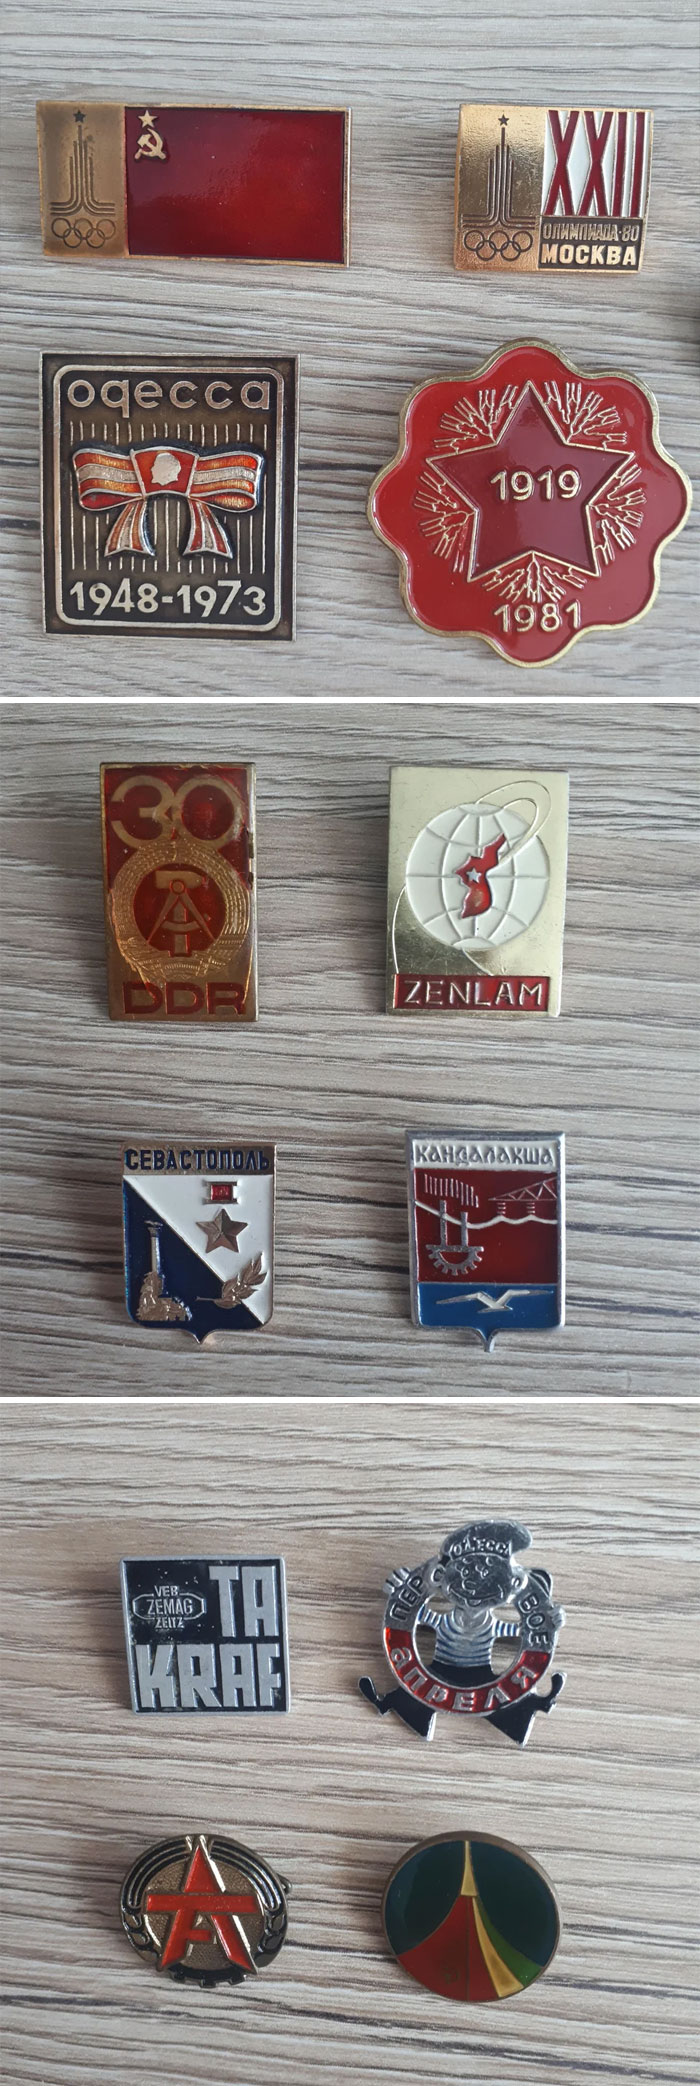 My Late Grandfather Was A Hungarian Politician In The Communist Era. Do You Have Any Information About These Pins?